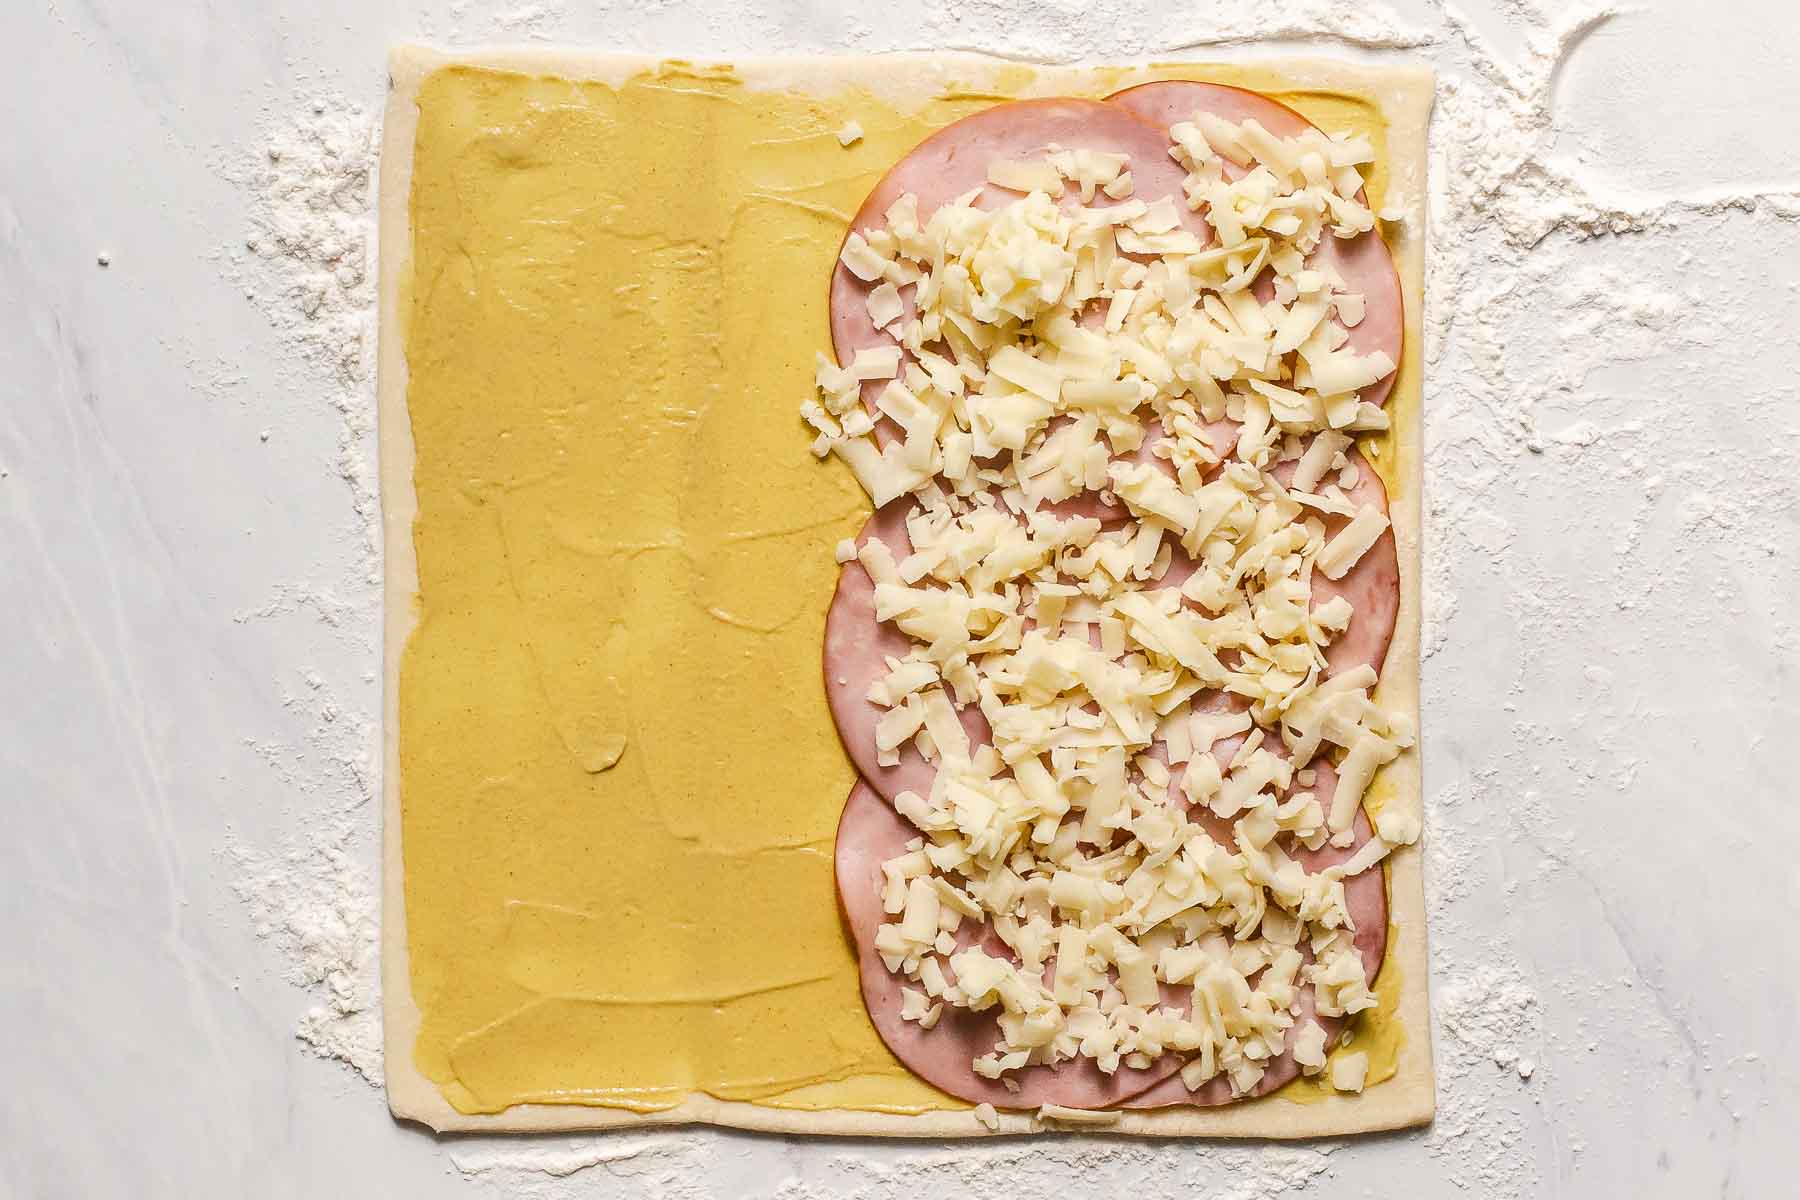 Pastry with ham and cheese on half.